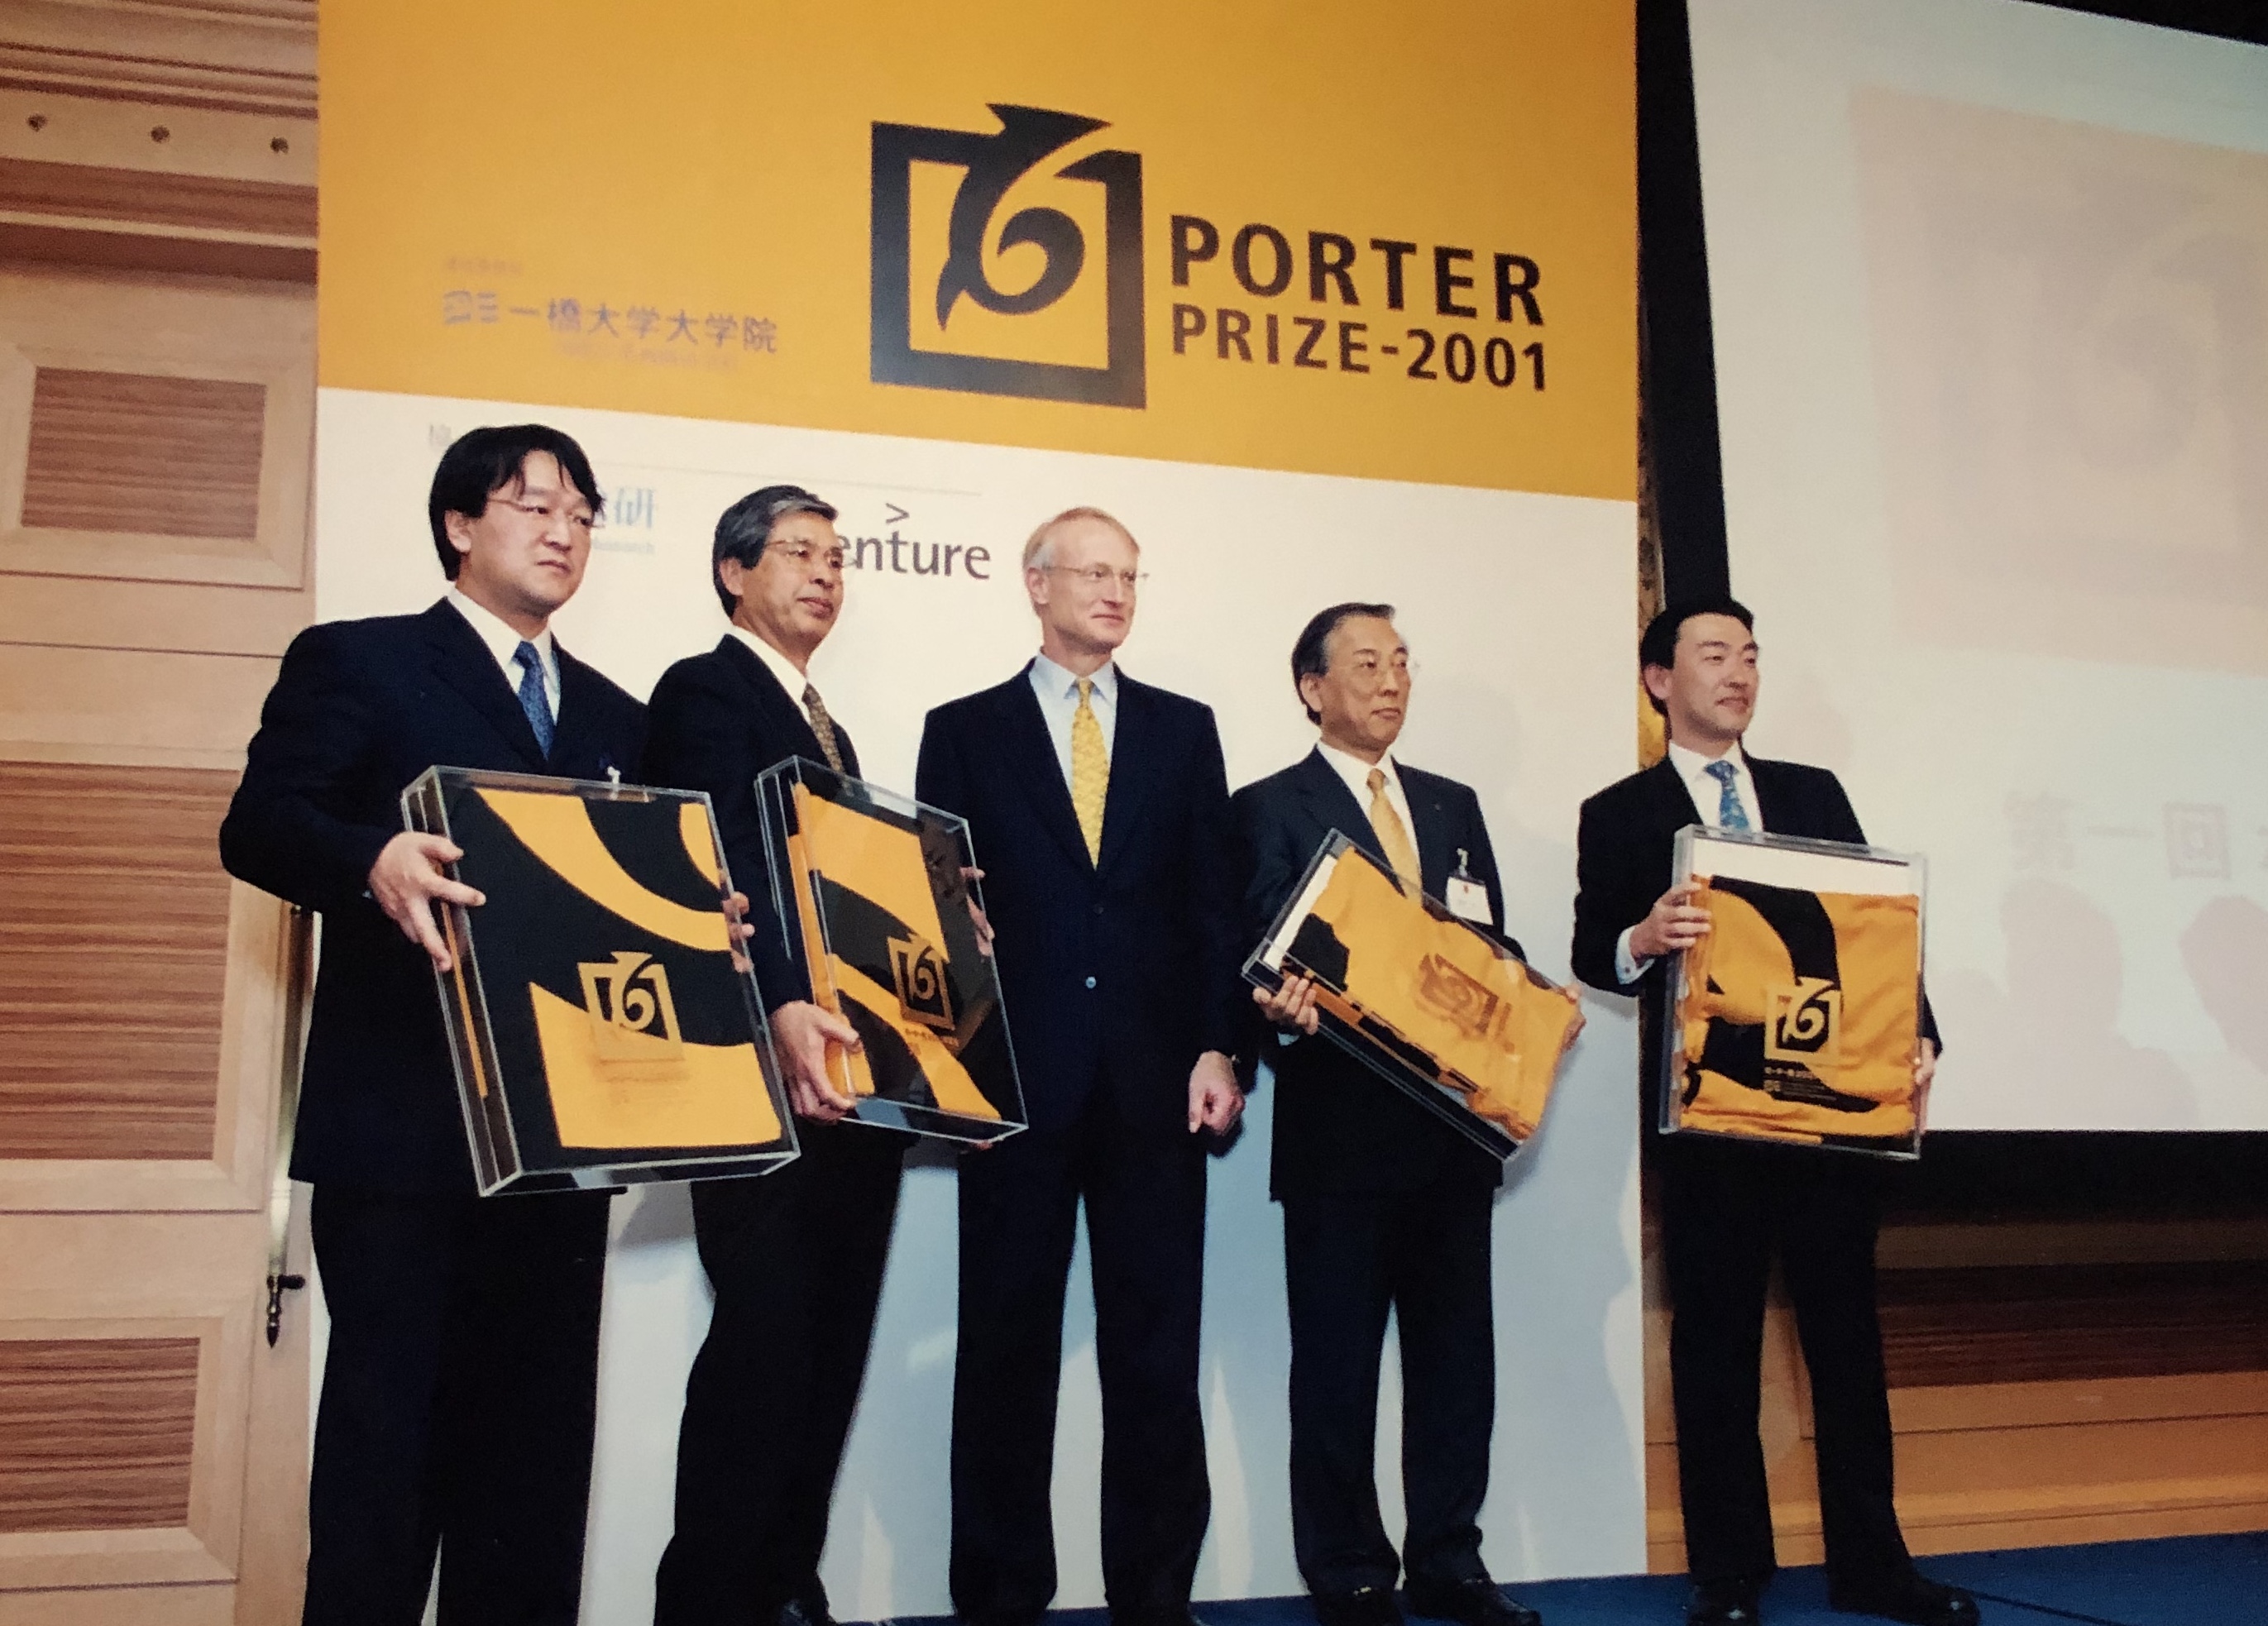 ICS Porter Prize First Edition 2001